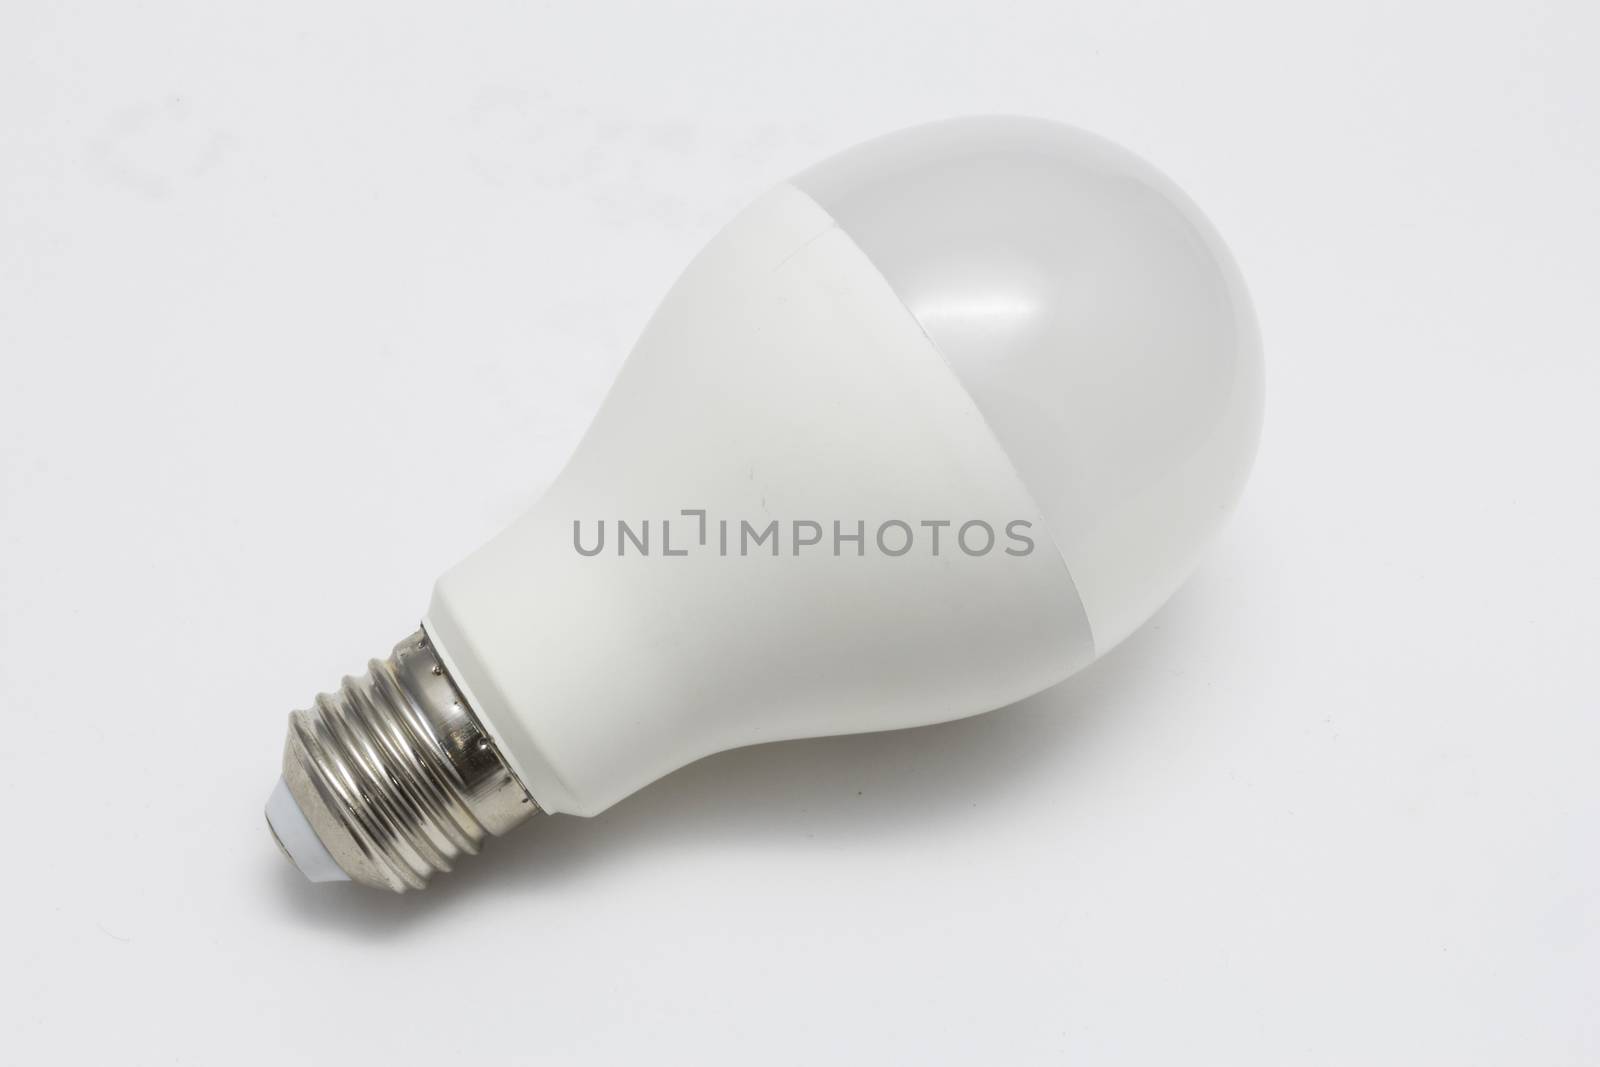 LED Light bulb isolated on white background by chingraph